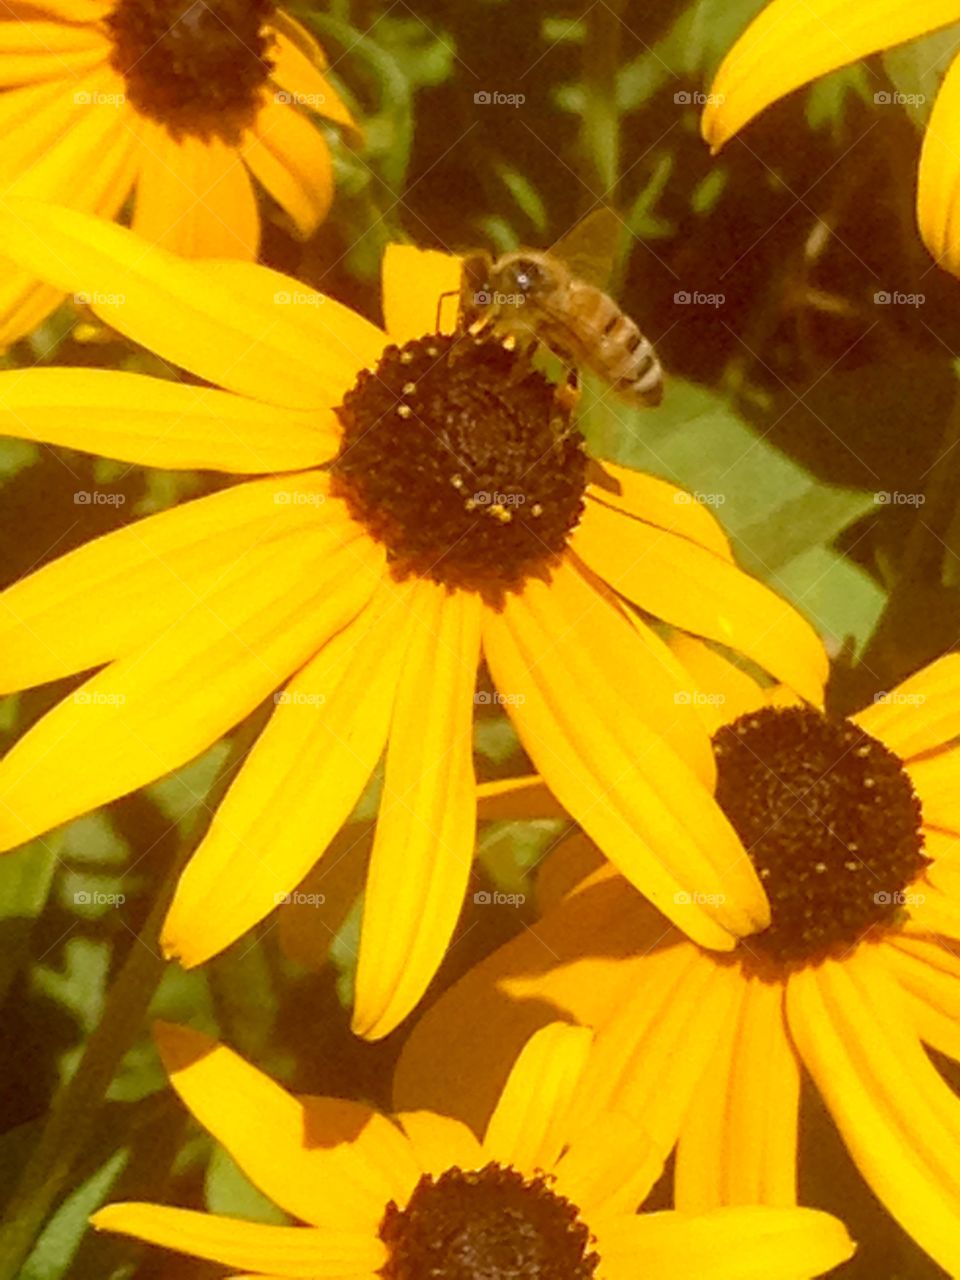 Bee on a yellow flower